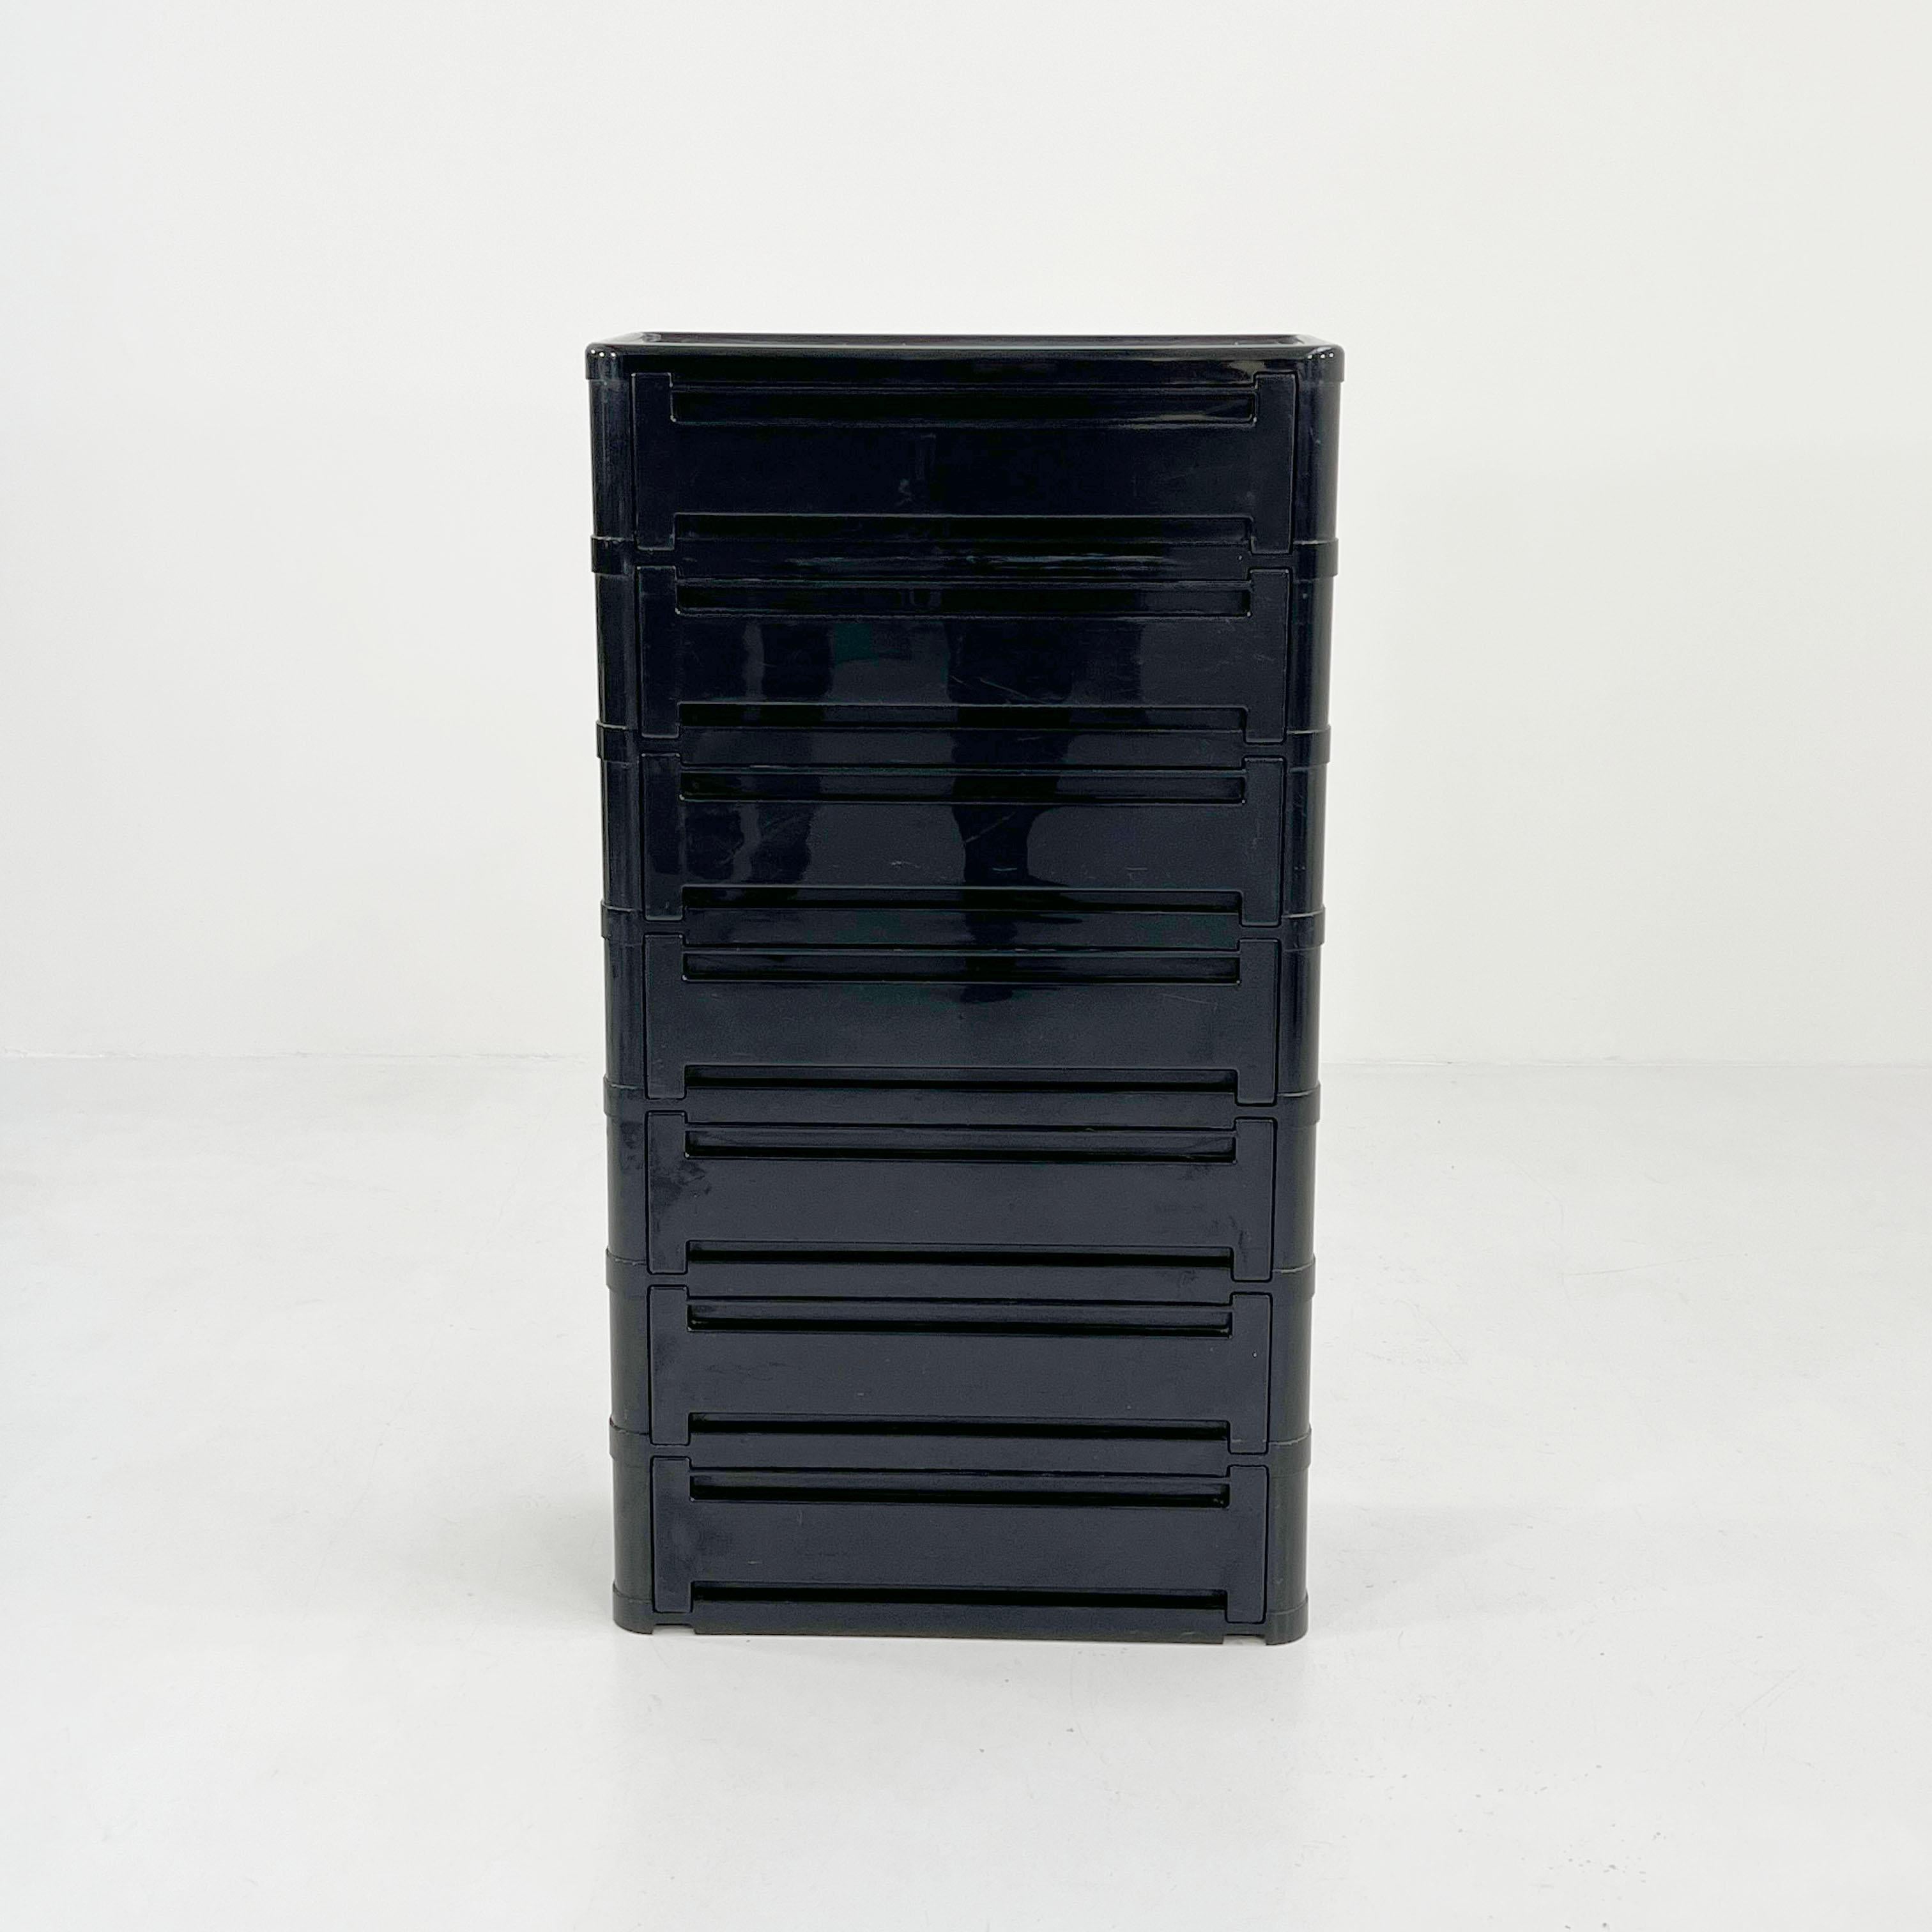 Space Age Black Chest of Drawers Model “4964” by Olaf Von Bohr for Kartell, 1970s